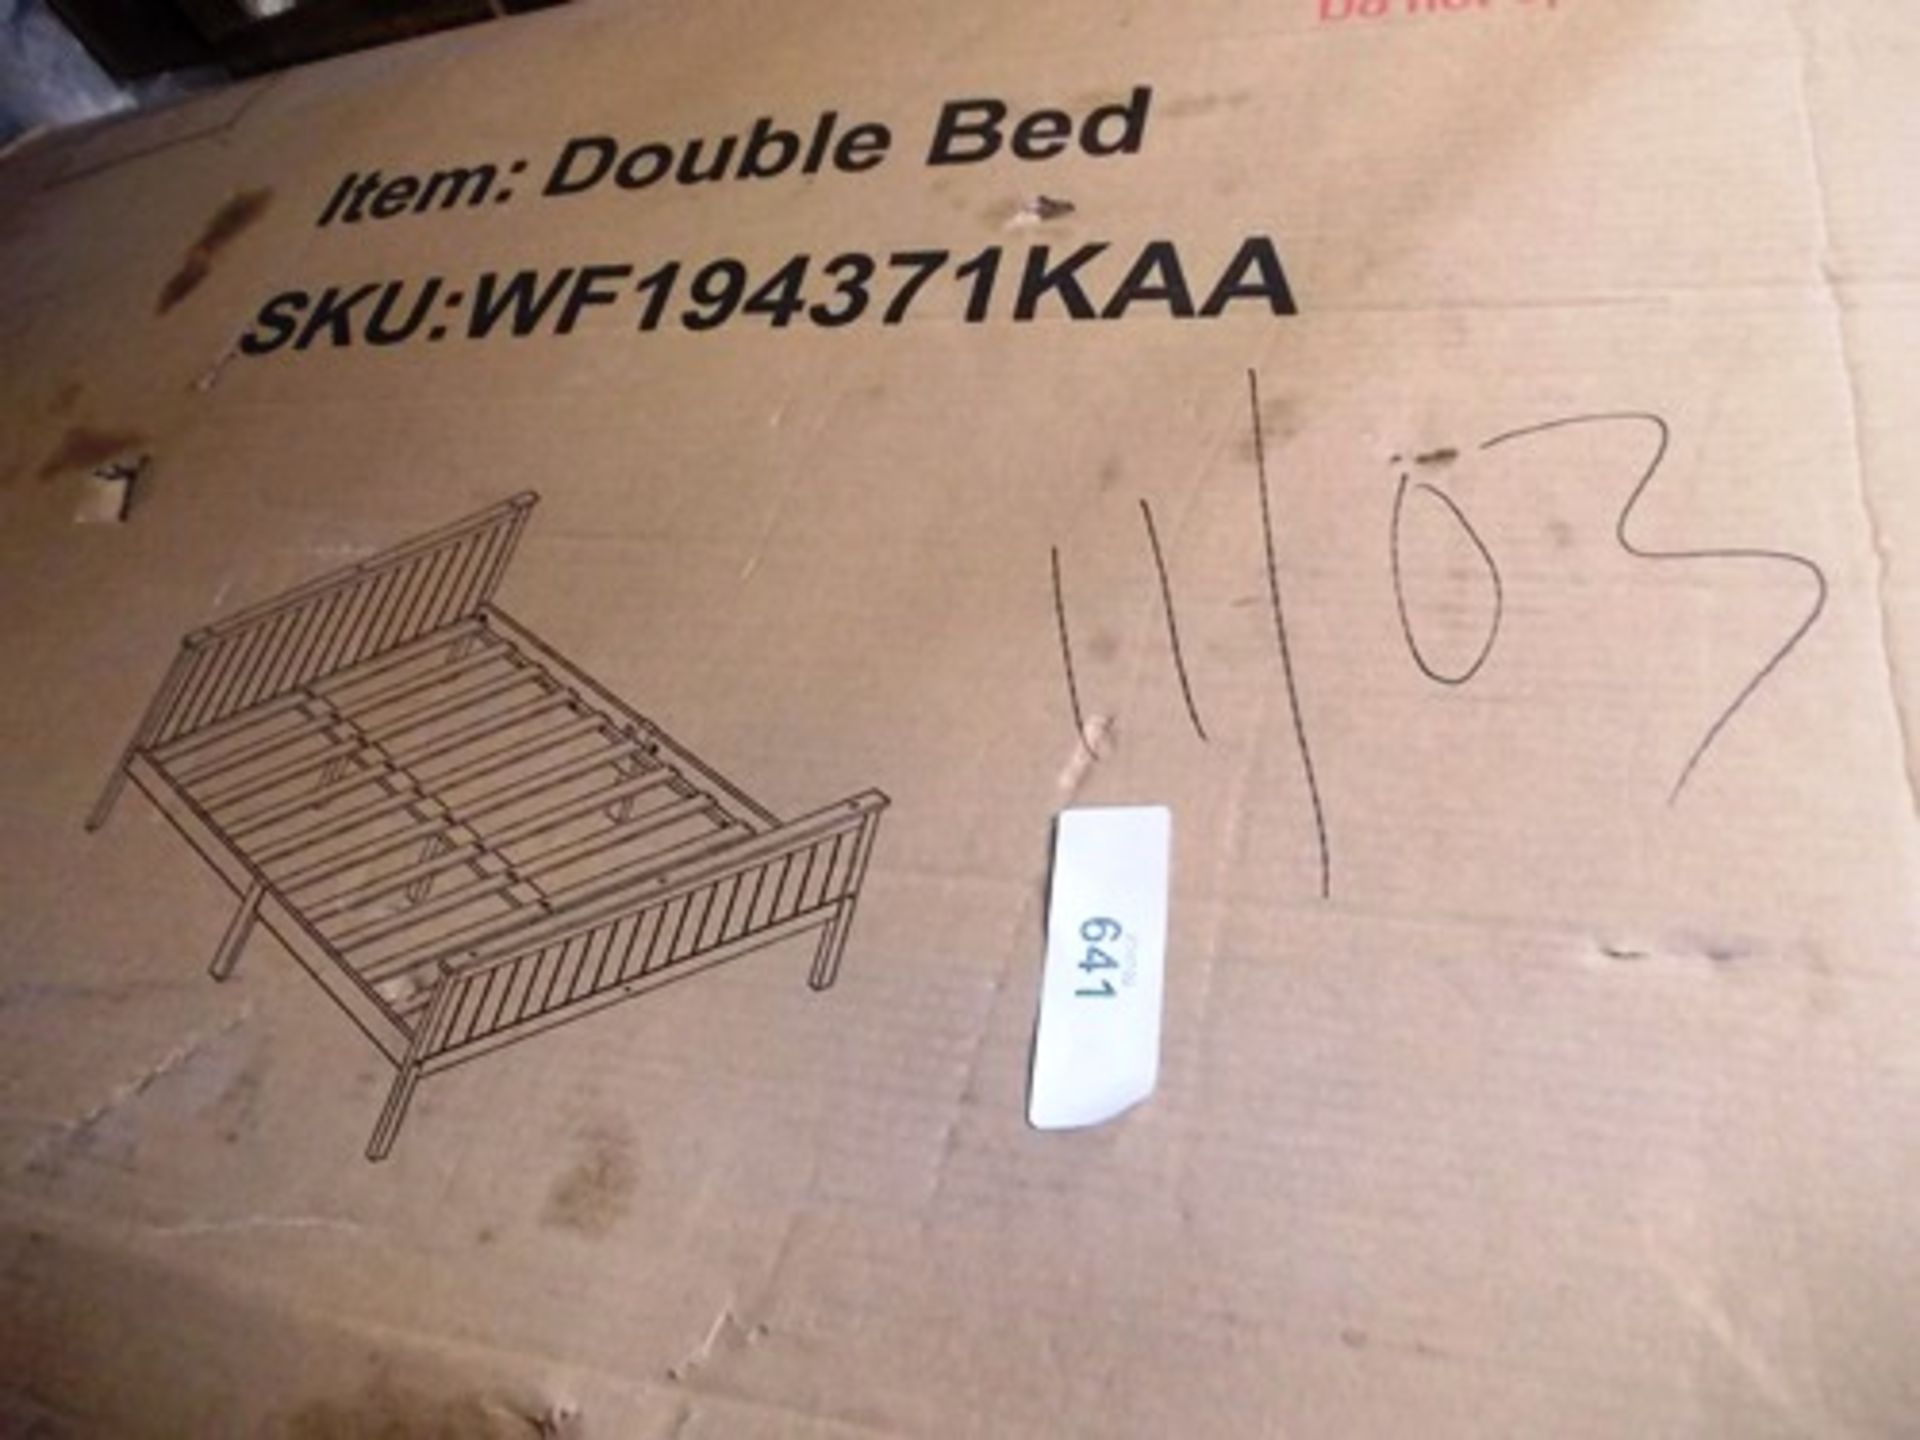 1 x unbranded double bed, SKU: WF194371KAA, new in box, box tatty, together with 5 x headboards in